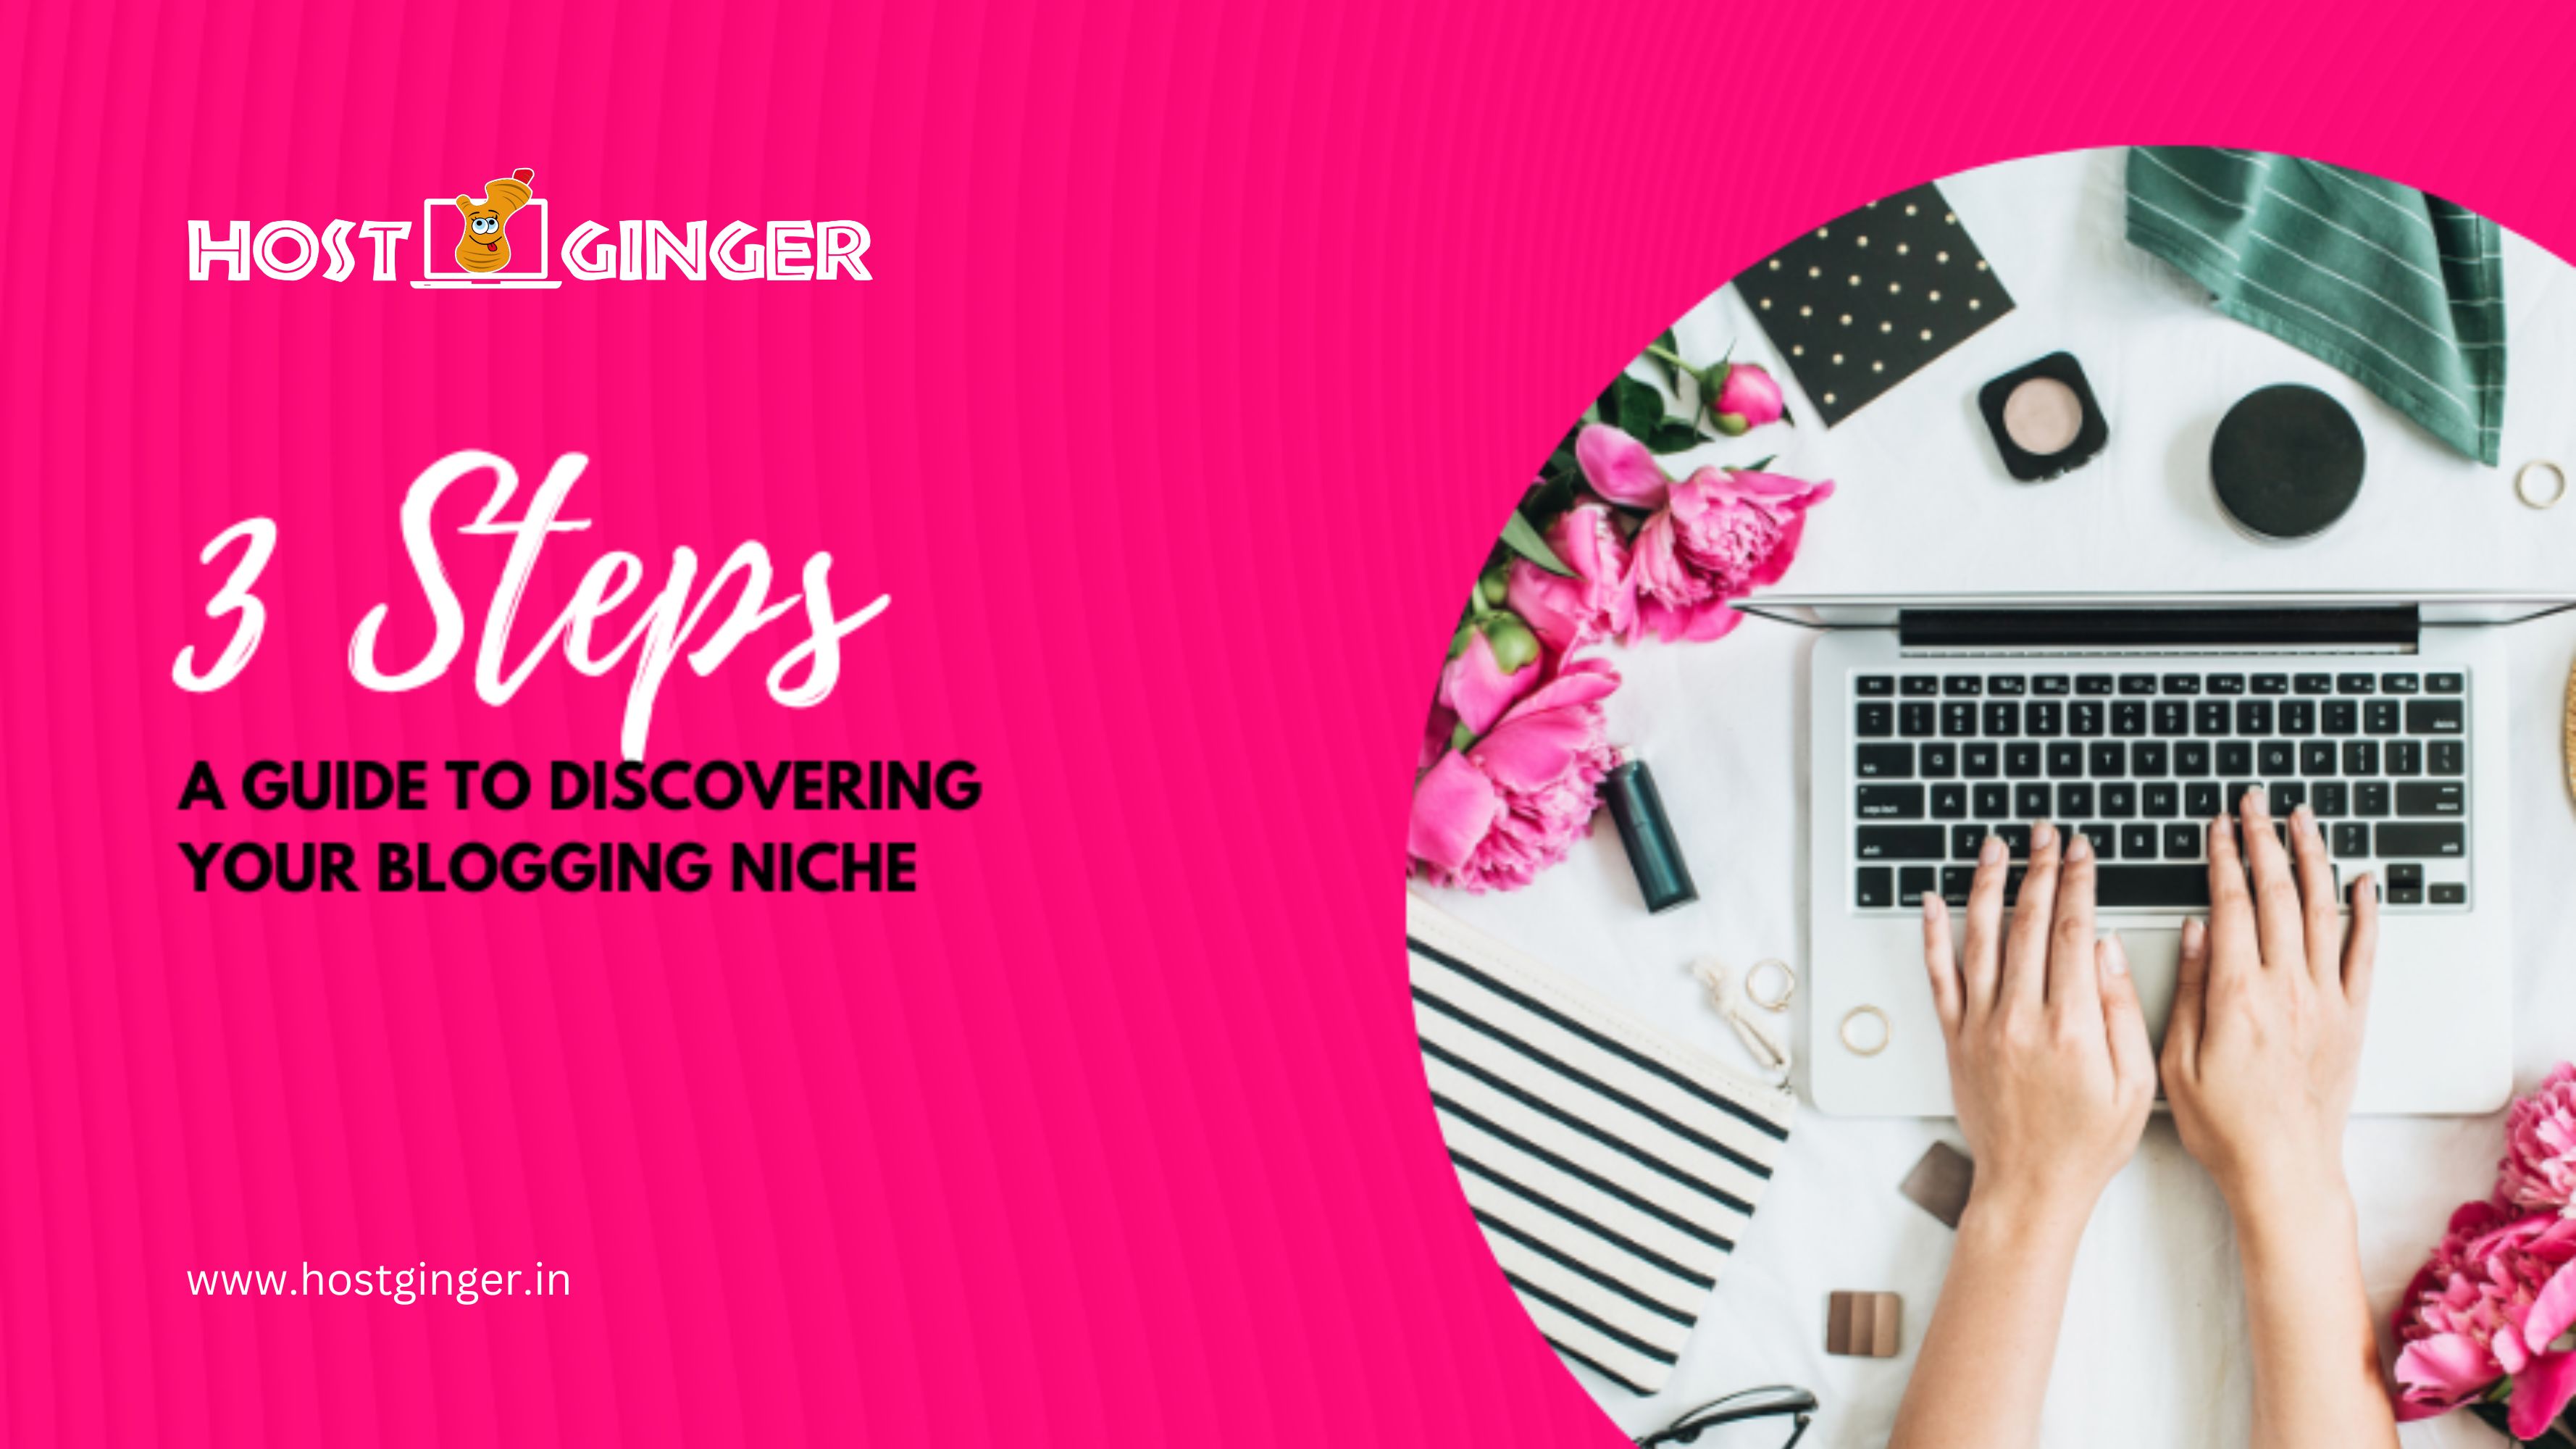 A Guide to Discovering Your Blogging Niche in 3 steps